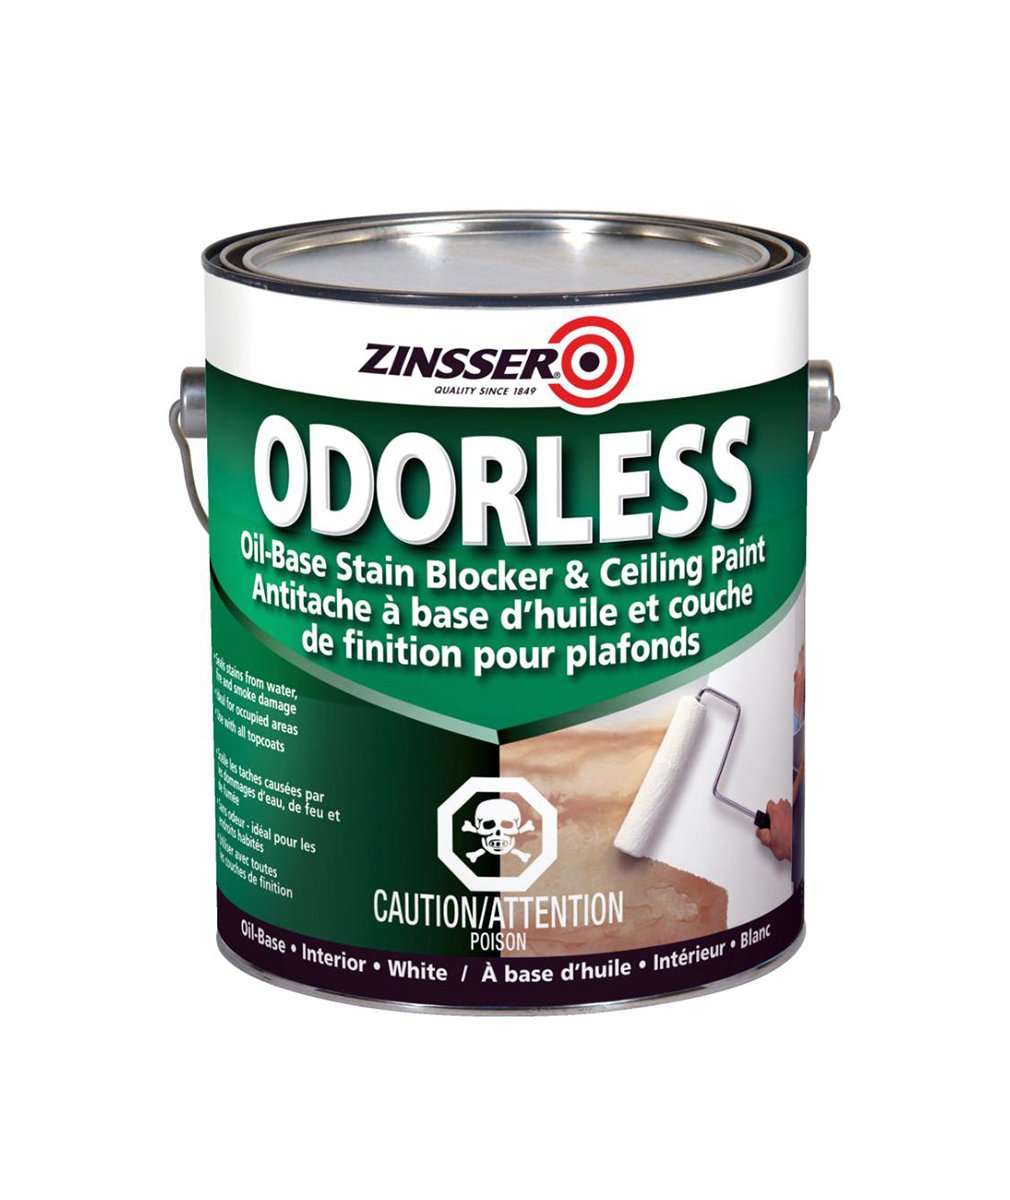 Zinsser Odorless primer, available at Wallauer's in NY.